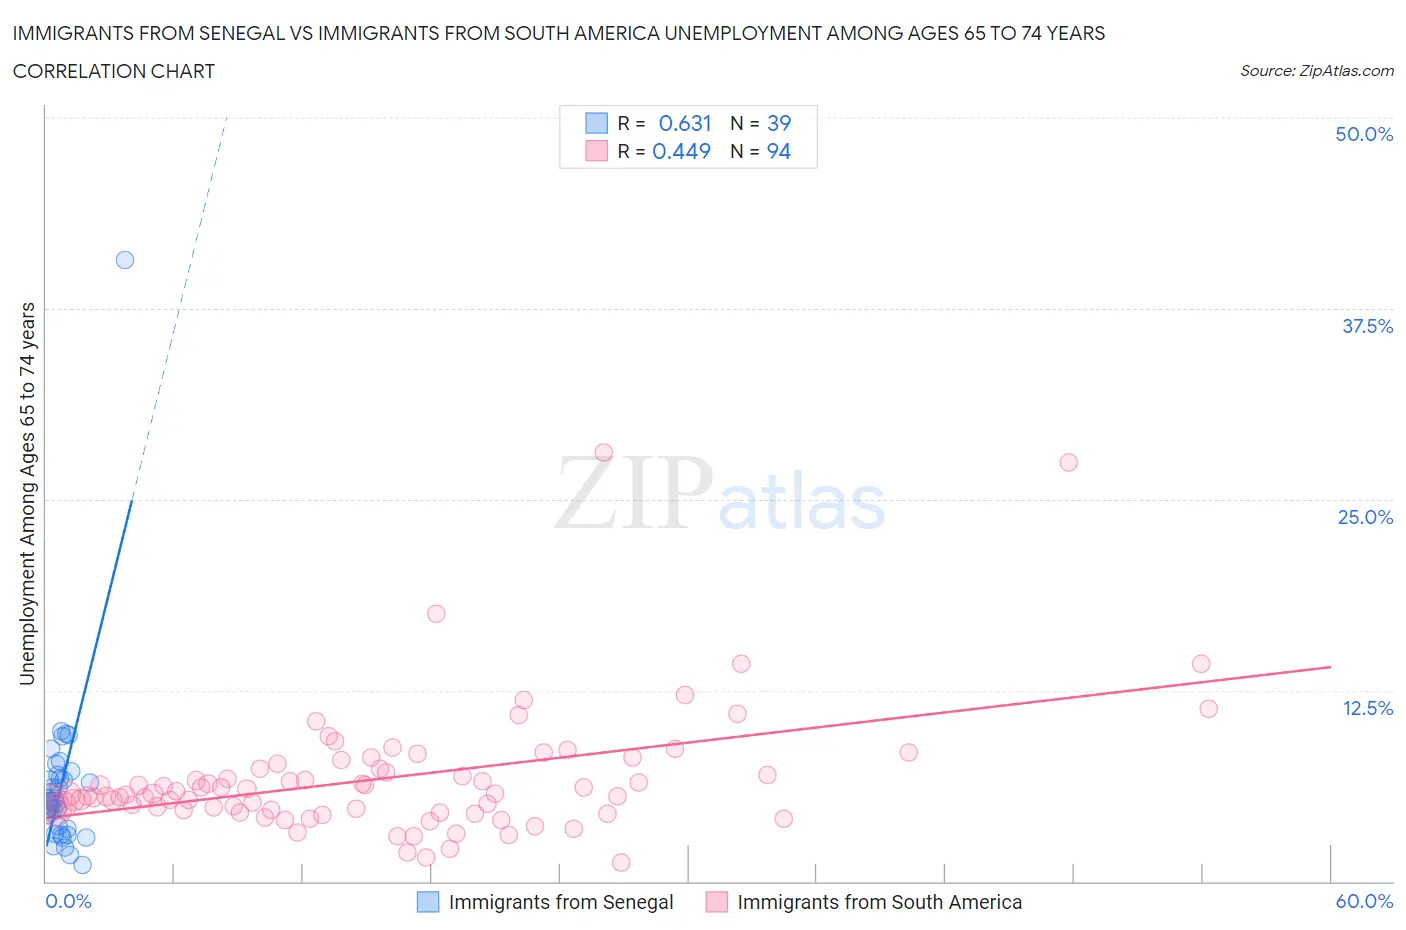 Immigrants from Senegal vs Immigrants from South America Unemployment Among Ages 65 to 74 years